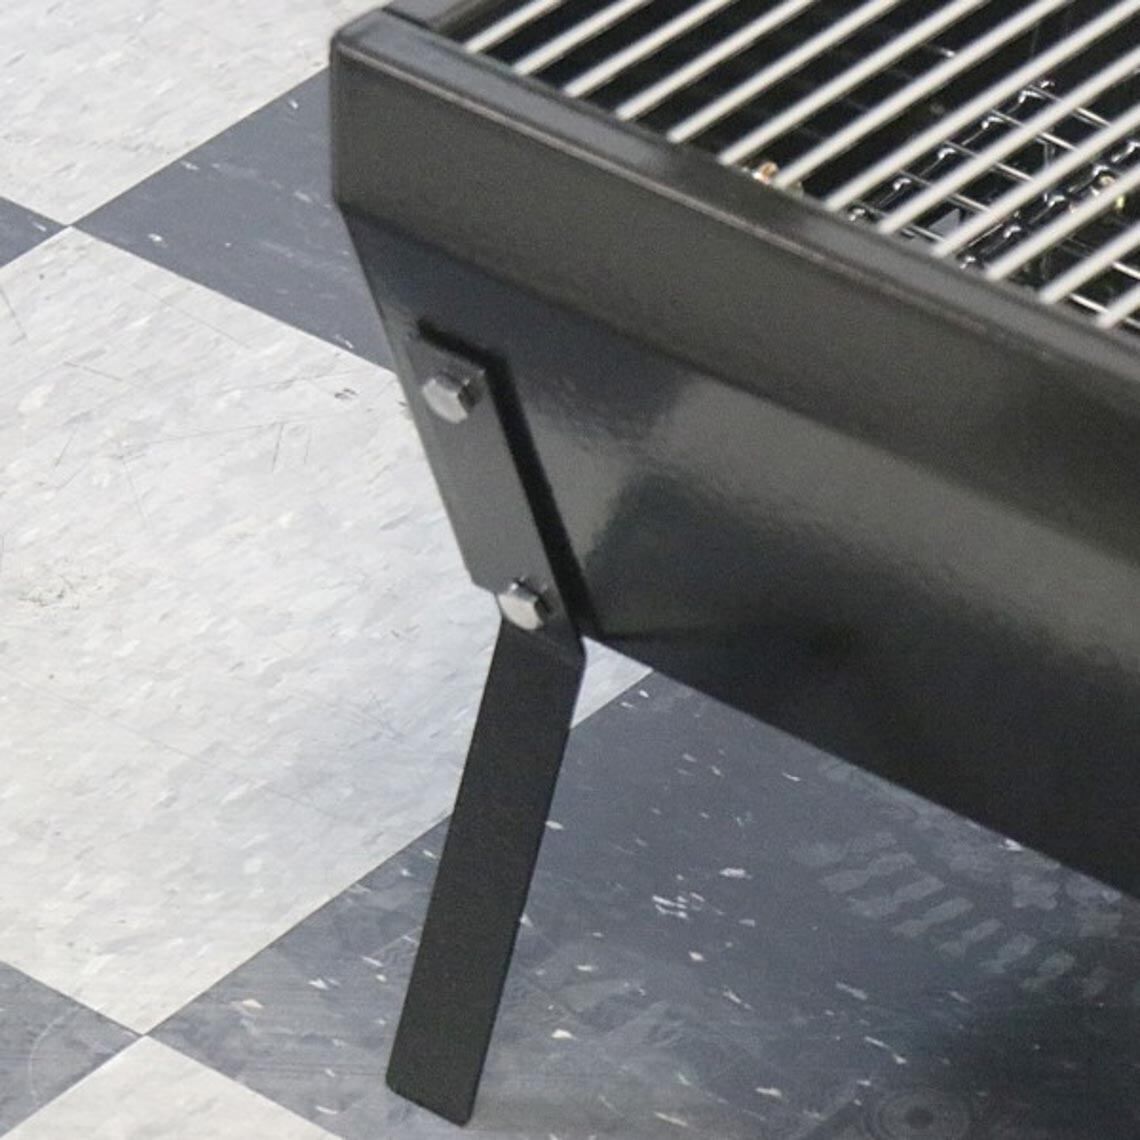 Scratch and Dent - 28" Stainless Steel Spit Rod Rotisserie Grill | v2 - FINAL SALE